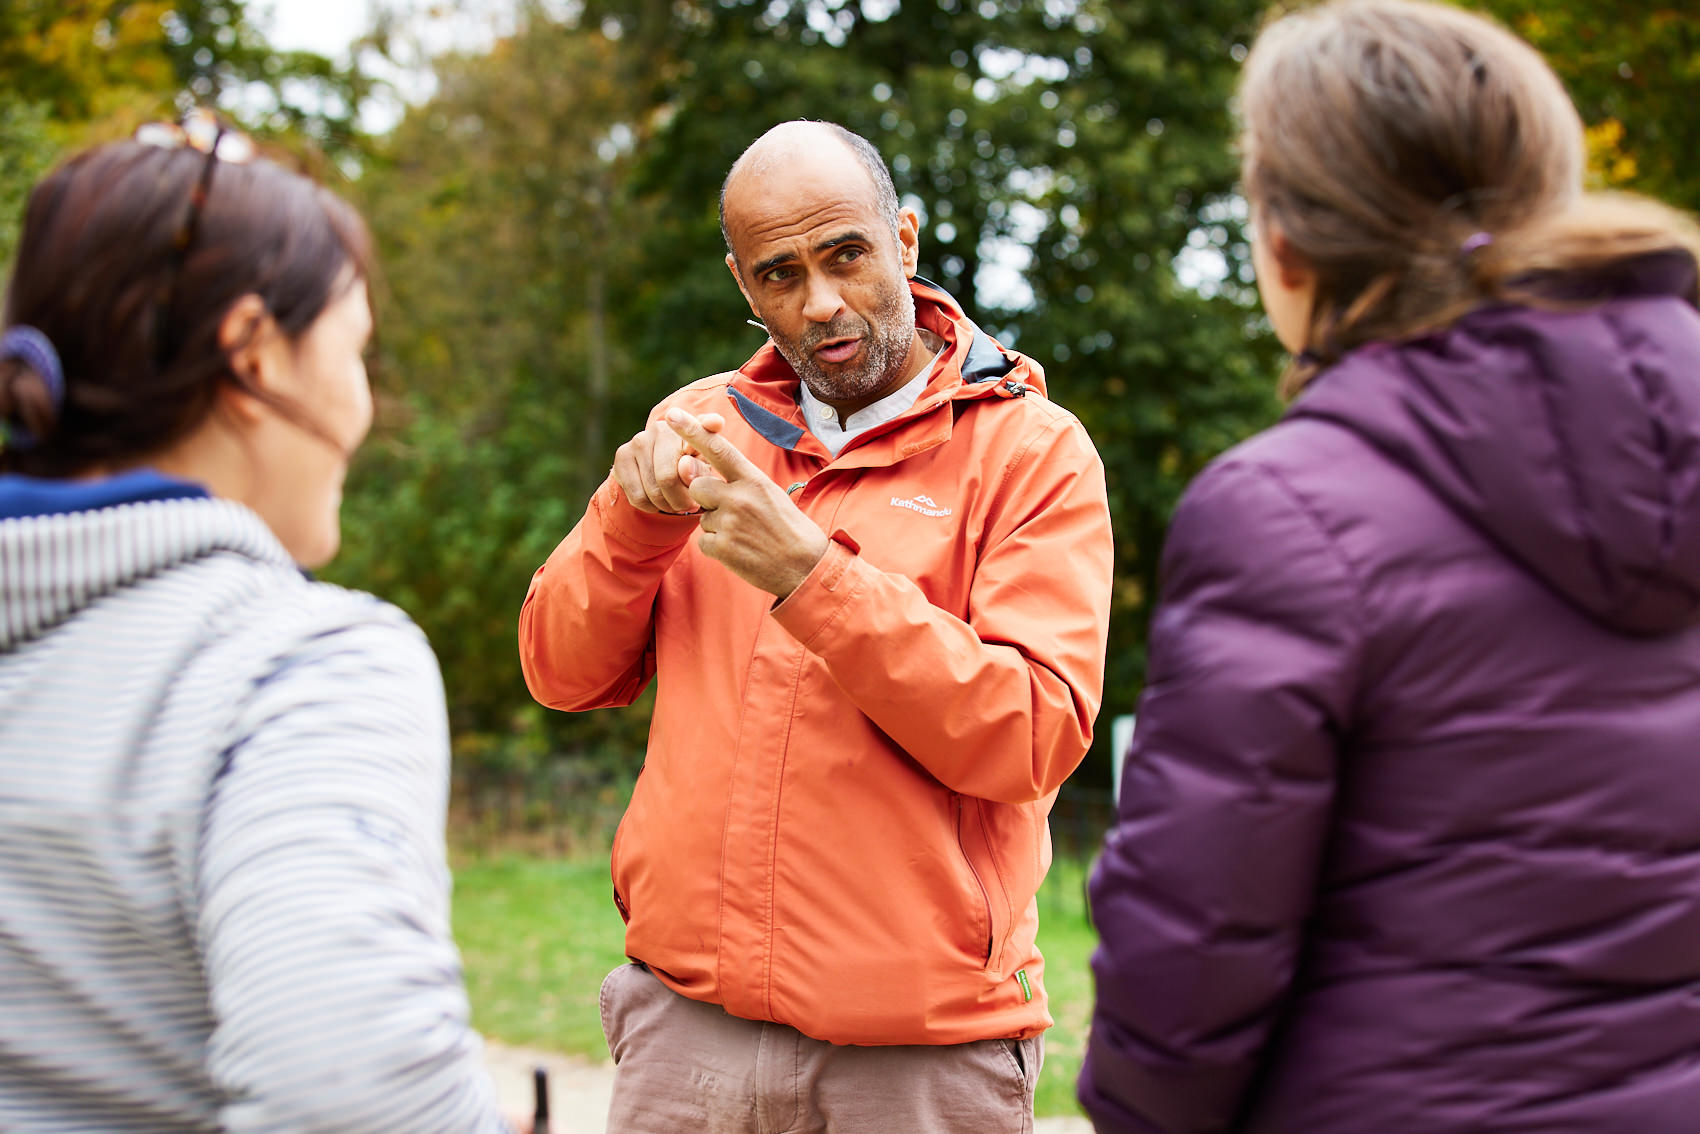 A man in an orange coat doing sign language outdoors